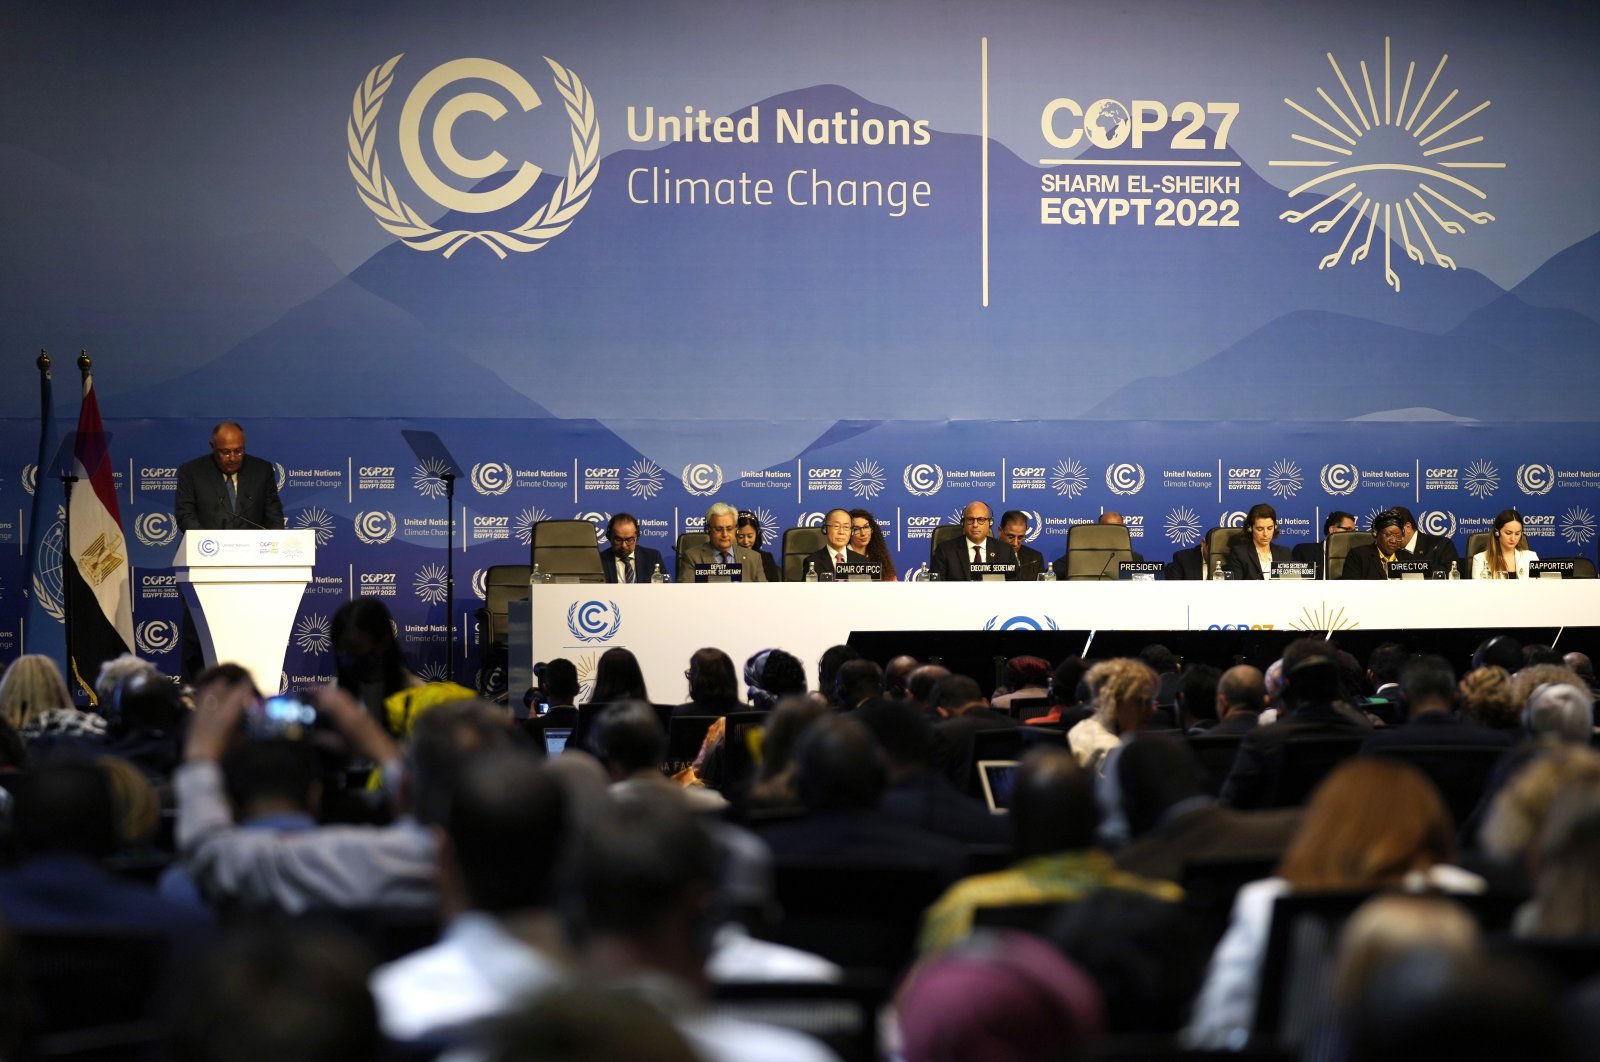 Sameh Shoukry (L), president of the COP27 climate summit, speaks during an opening session at the COP27 U.N. Climate Summit, in Sharm el-Sheikh, Egypt, Nov. 6, 2022. (AP Photo)